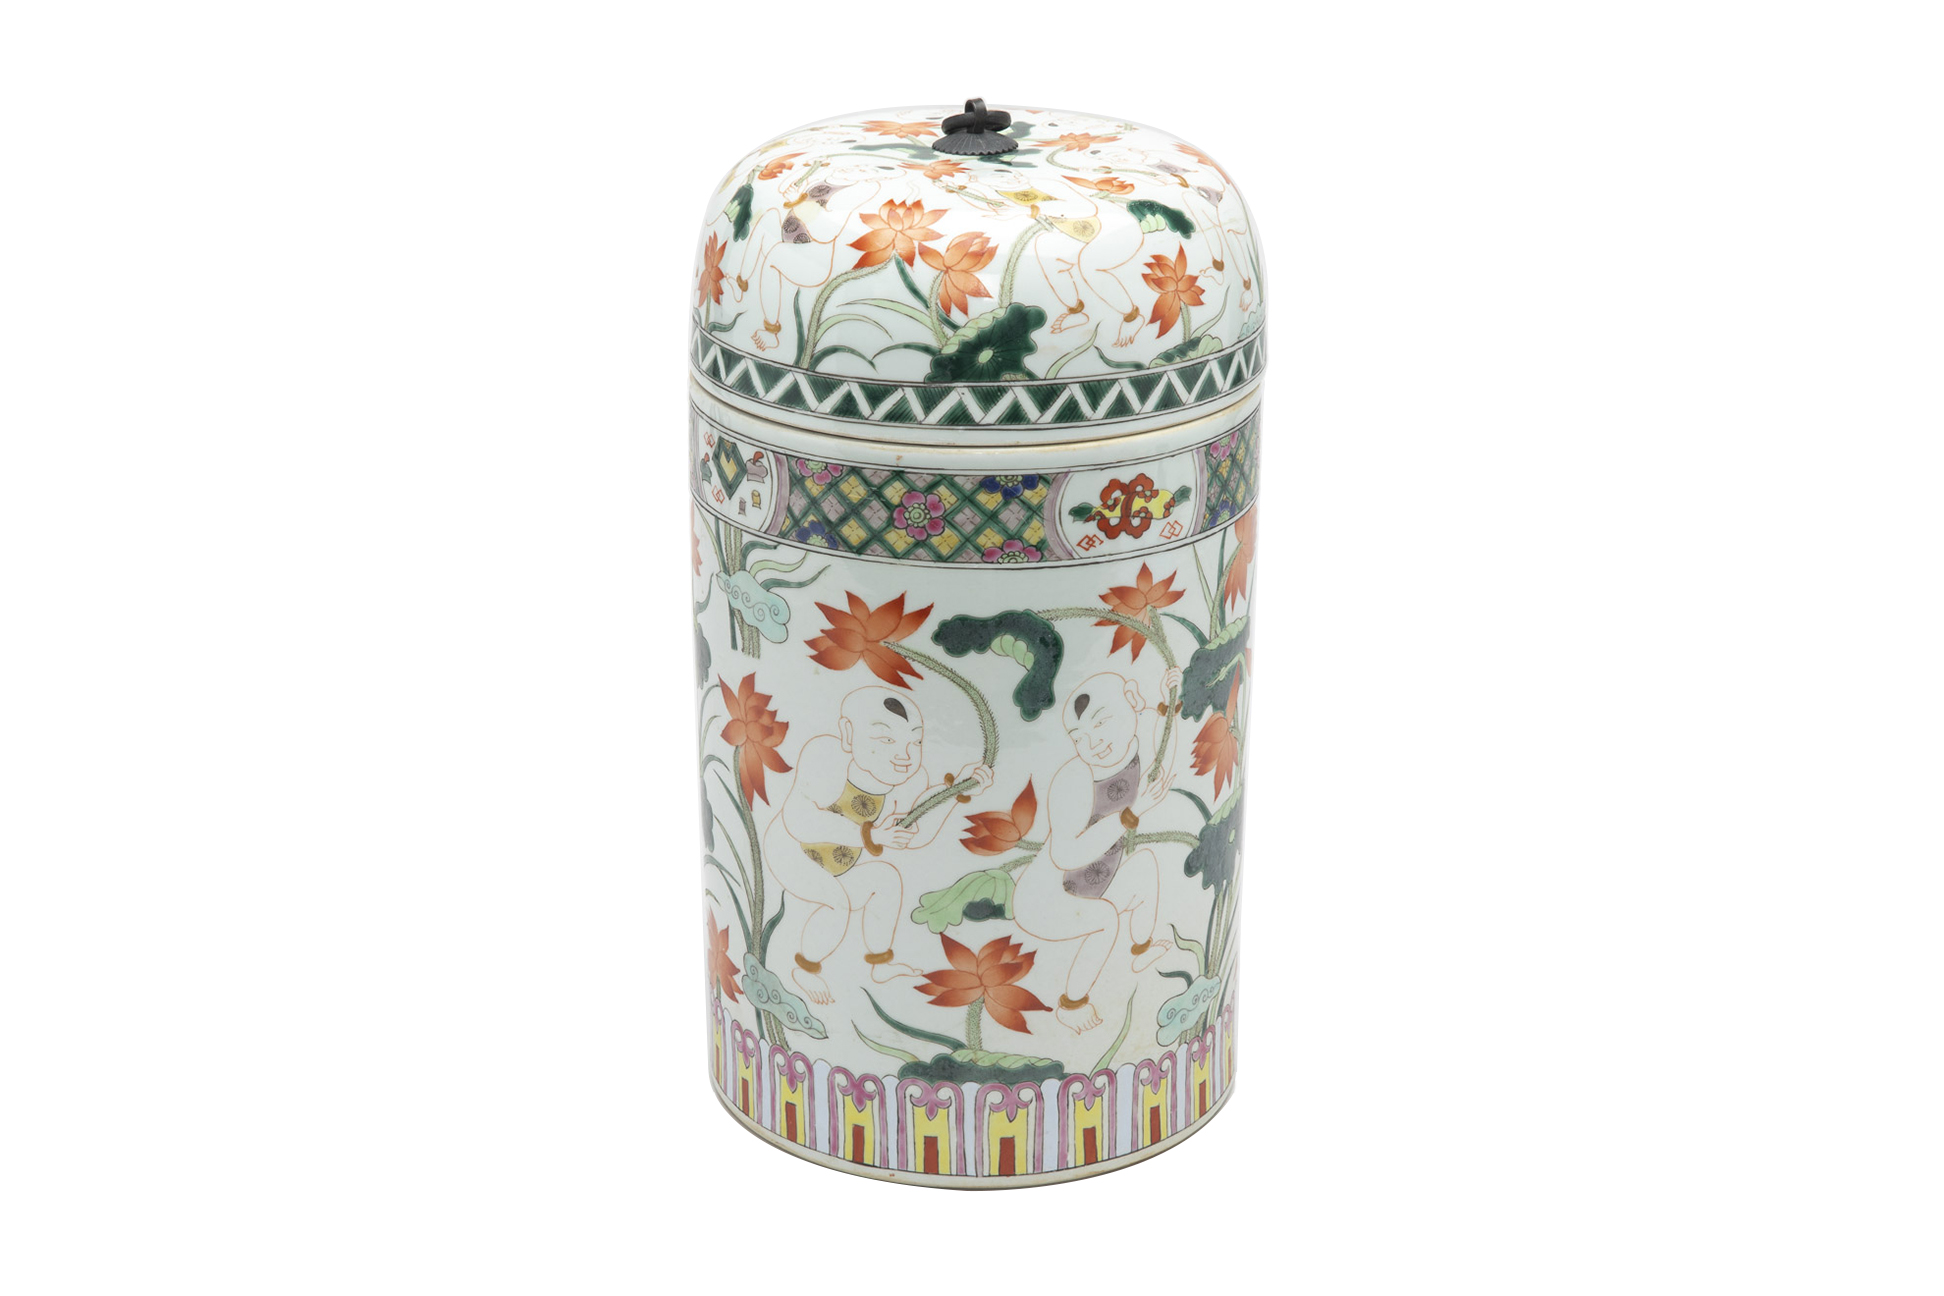 A CYLINDRICAL PORCELAIN VASE AND COVER